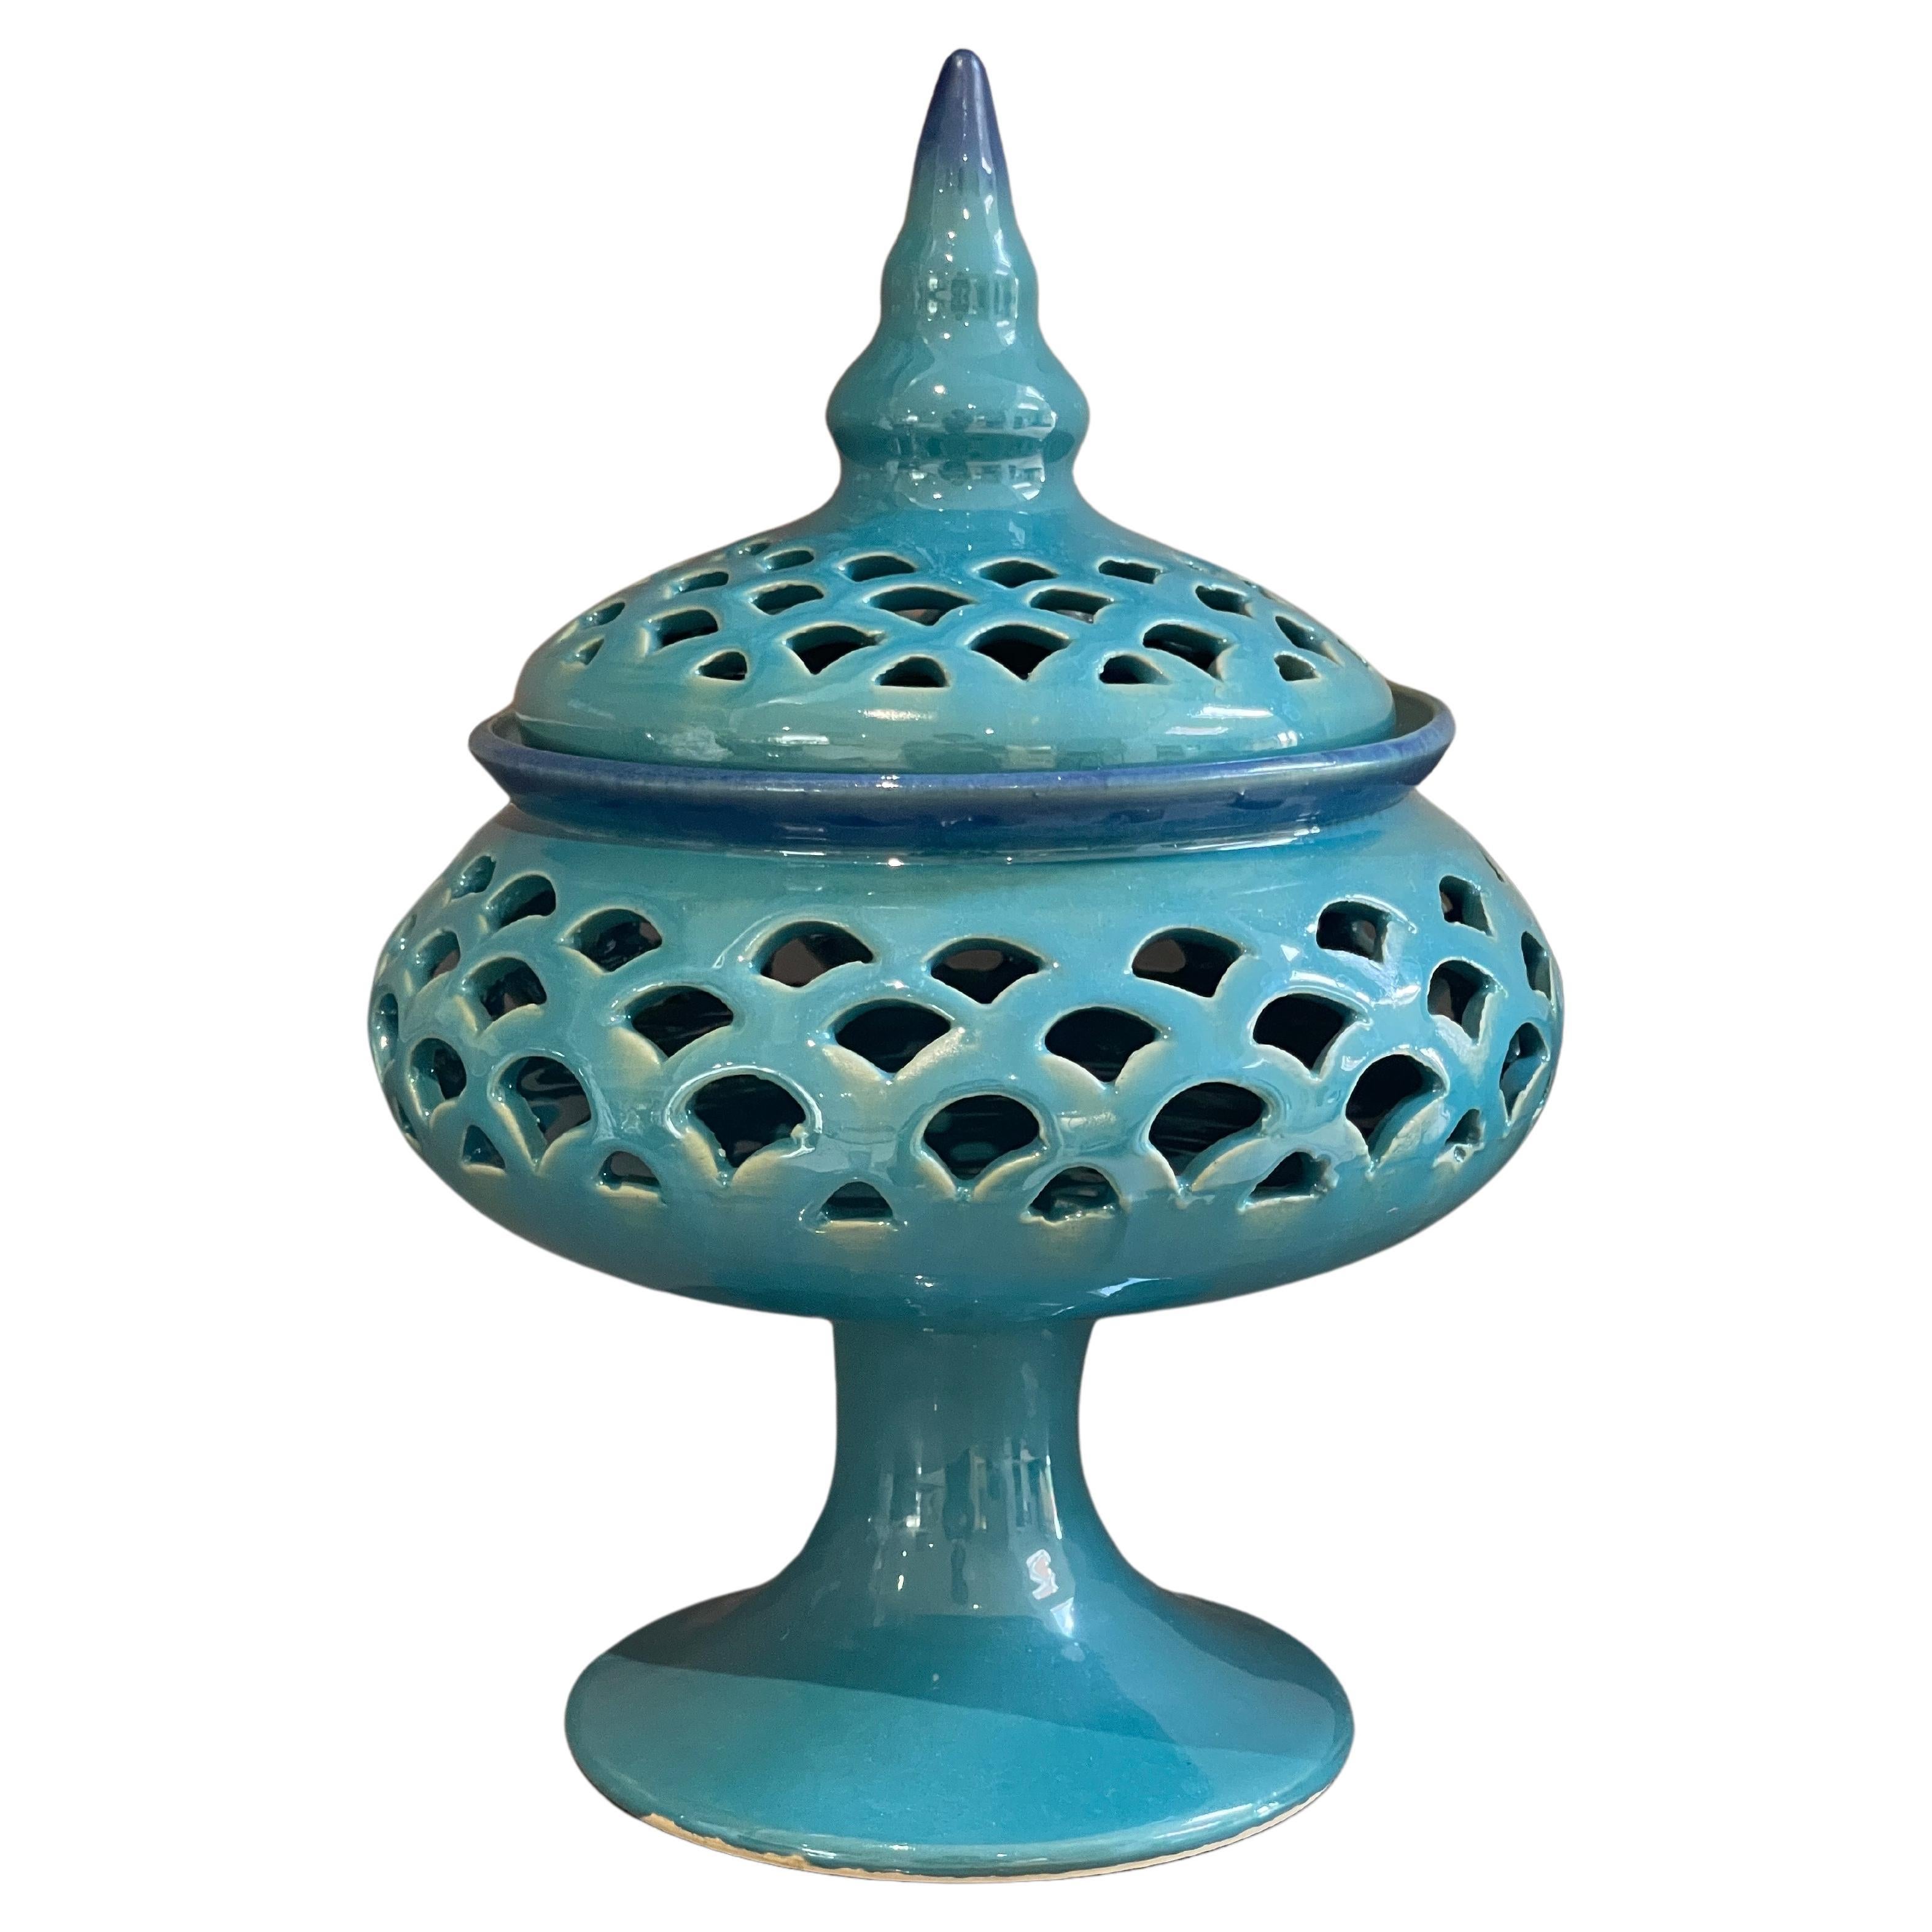 Candle Holder Hand Crafted Blue Ceramic Torches With Stand &Lid